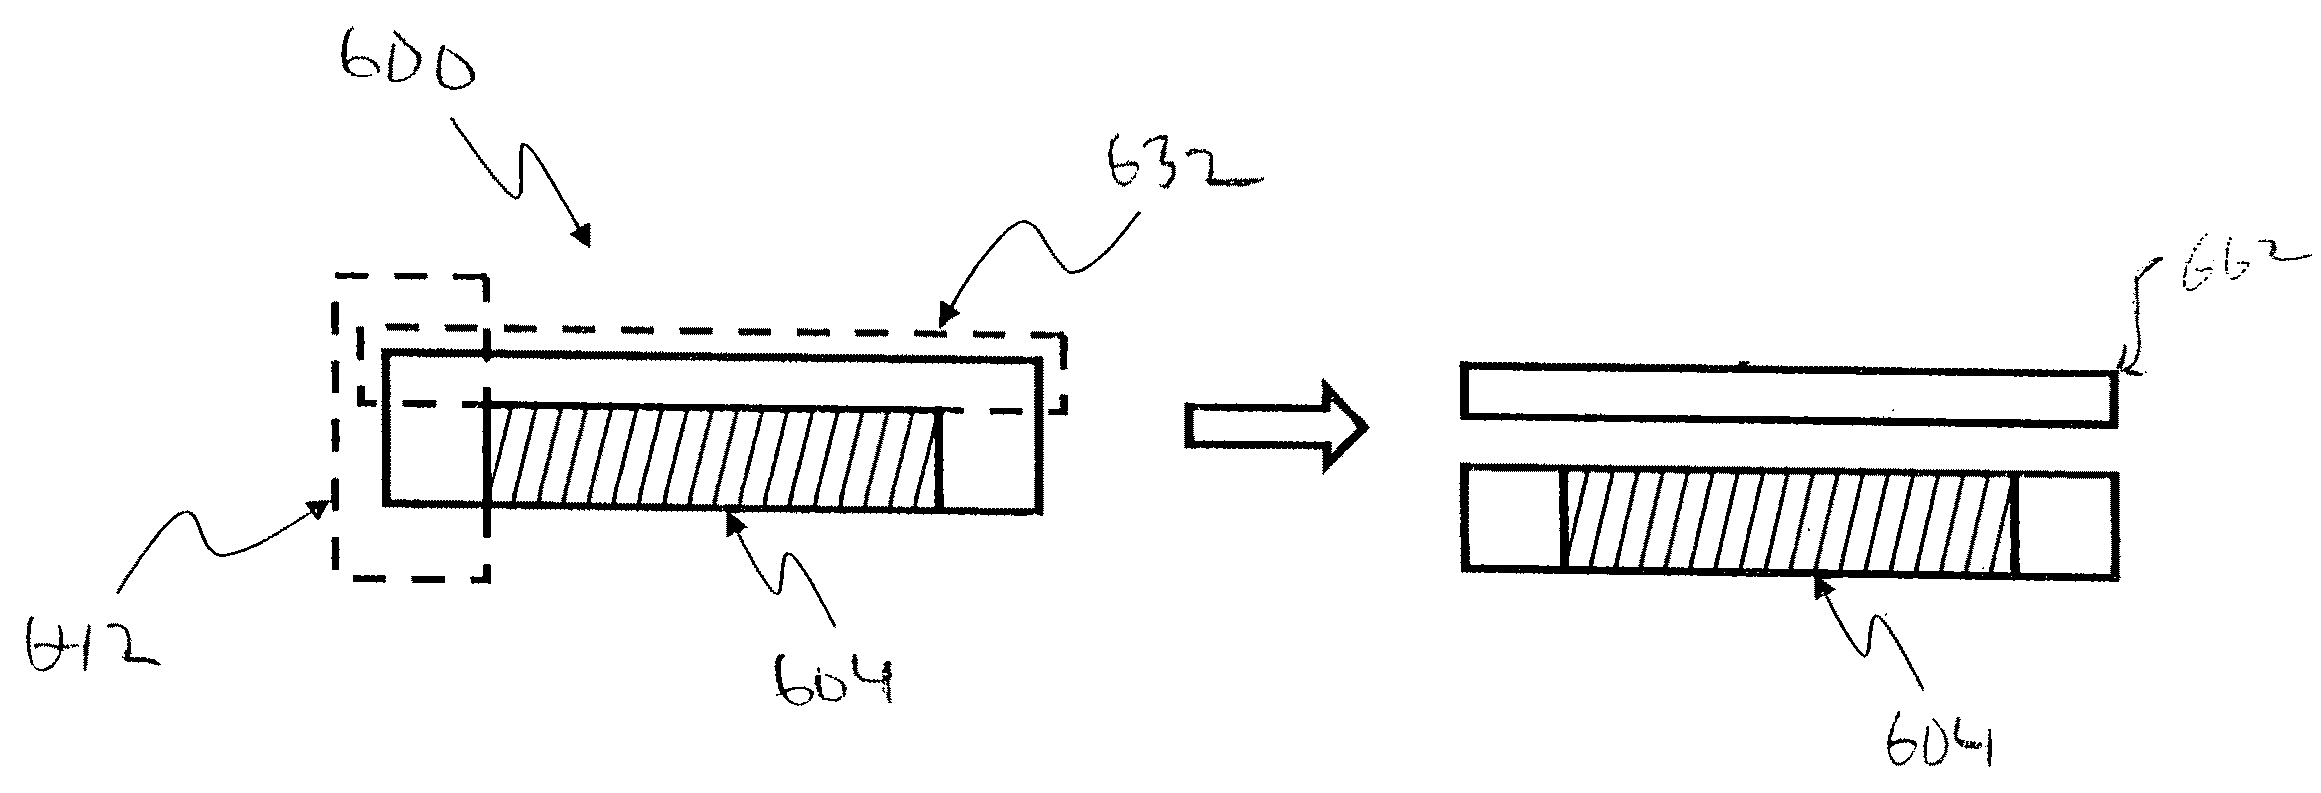 Non-polar and semi-polar GaN substrates, devices, and methods for making them